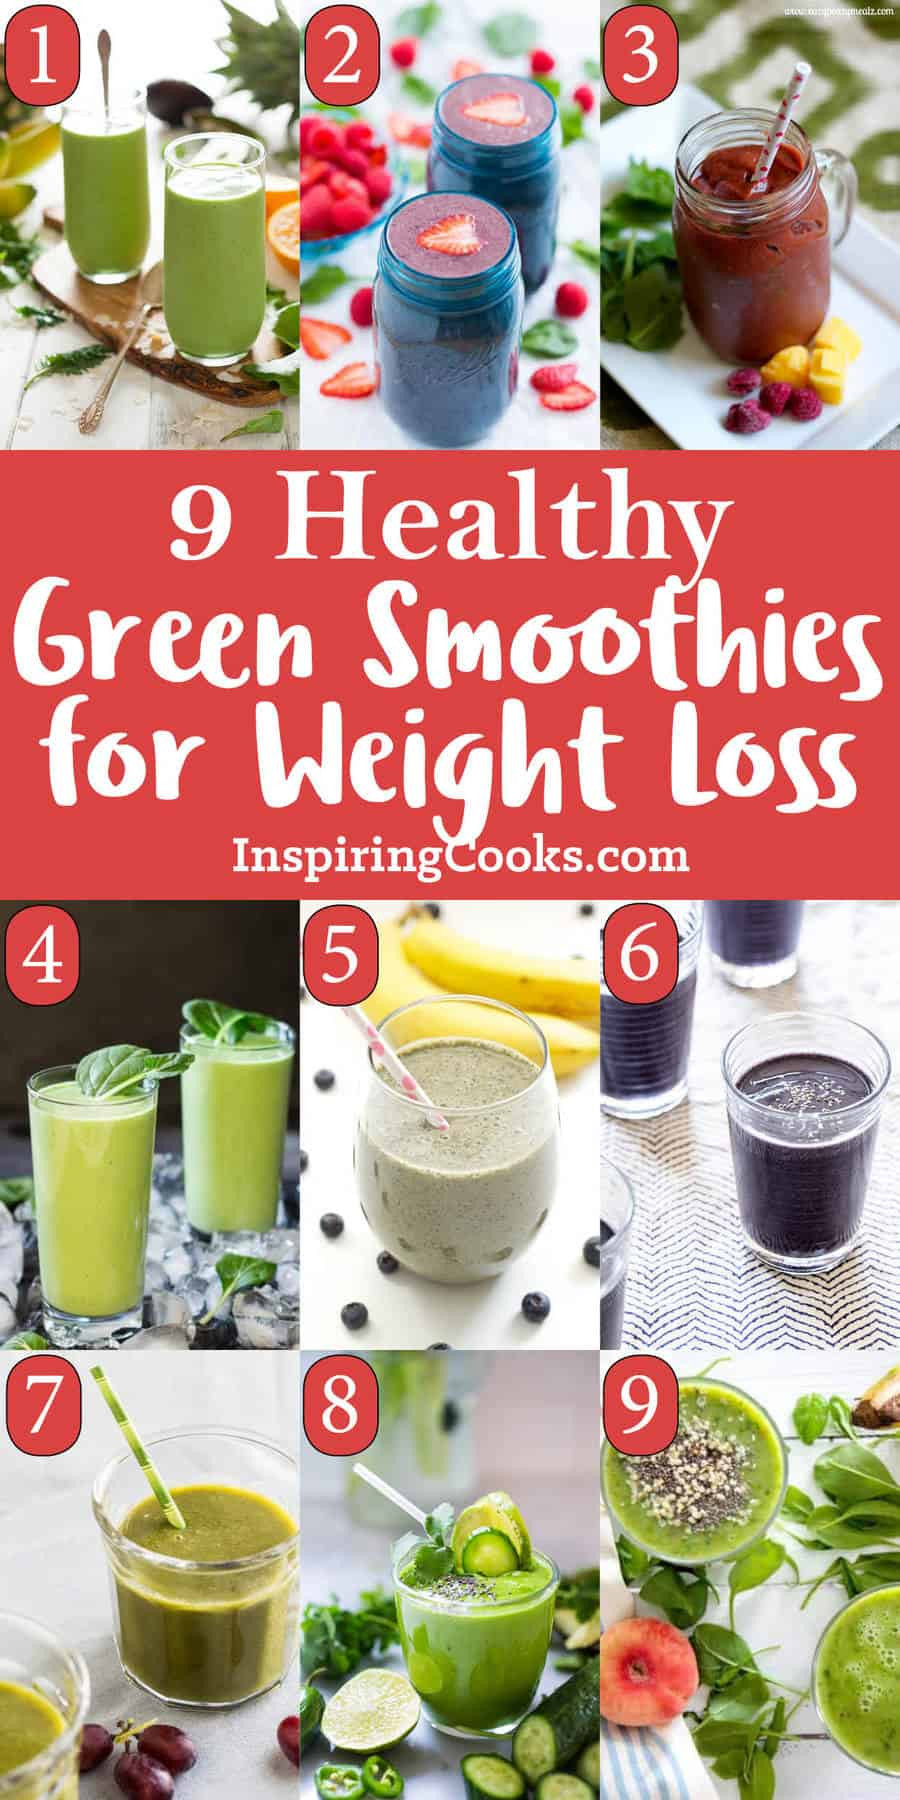 Healthy Green Smoothie Recipes For Weight Loss
 The Best 9 Healthy Green Smoothies for Weight Loss